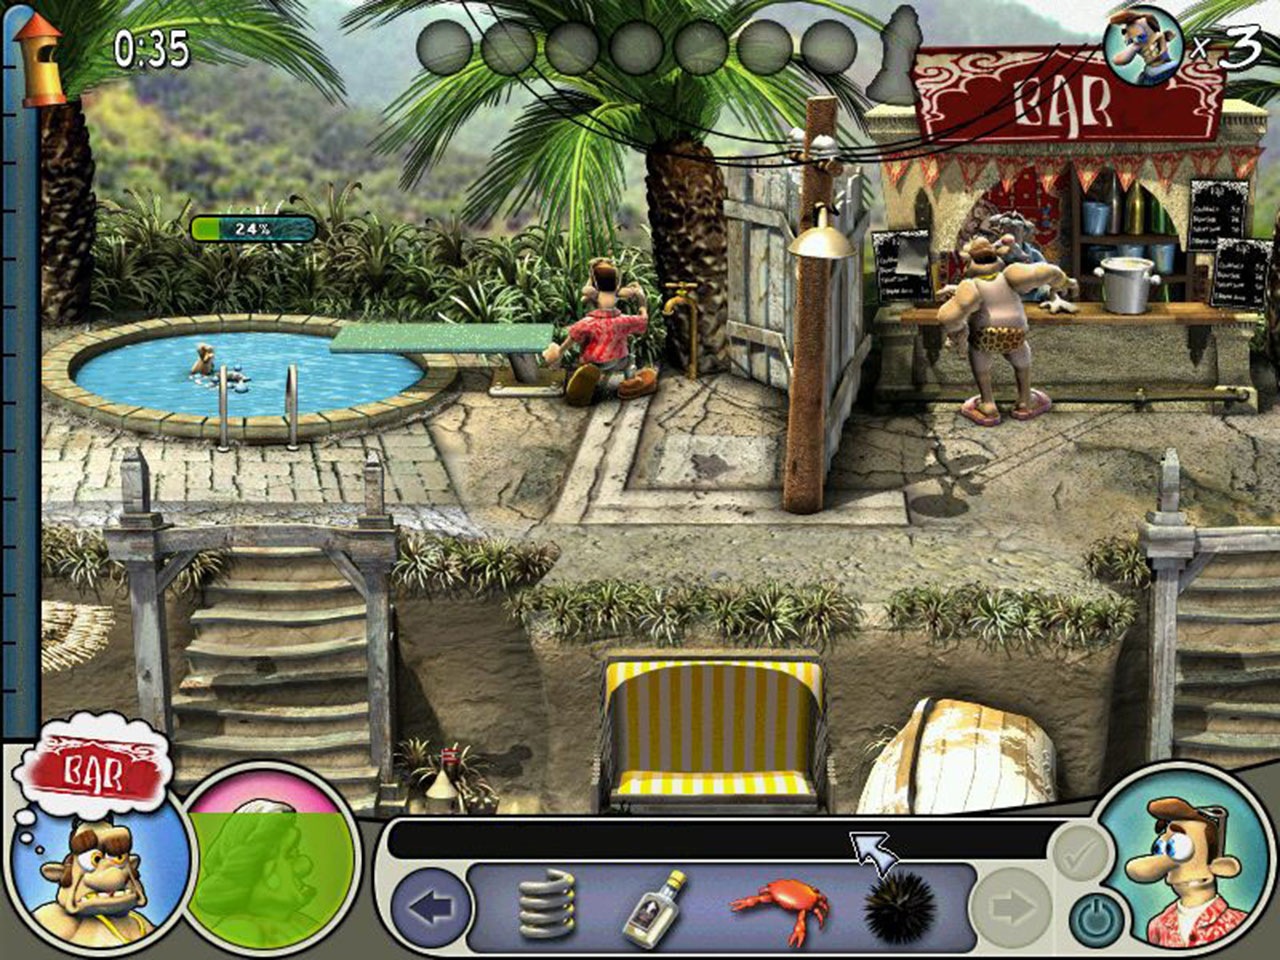 neighbours from hell free download full game pc